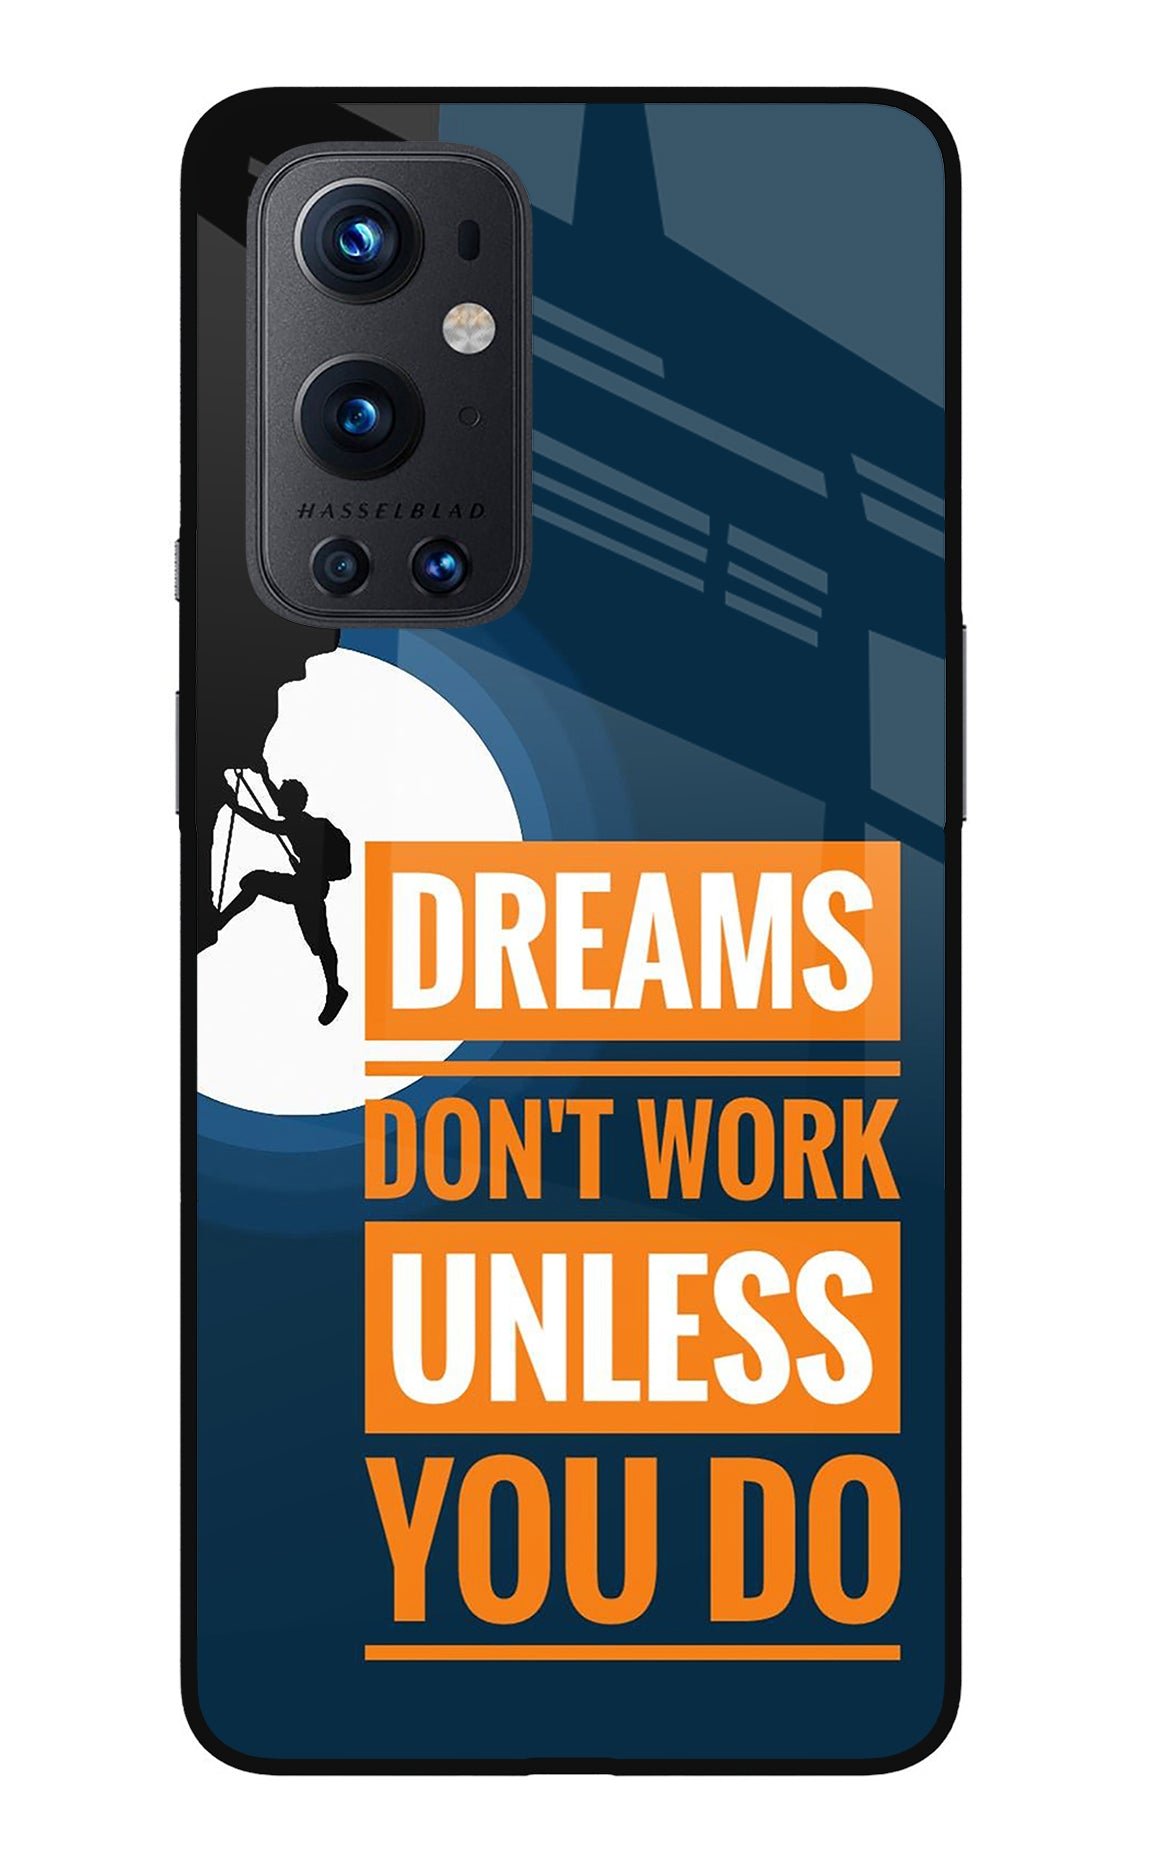 Dreams Don’T Work Unless You Do Oneplus 9 Pro Back Cover